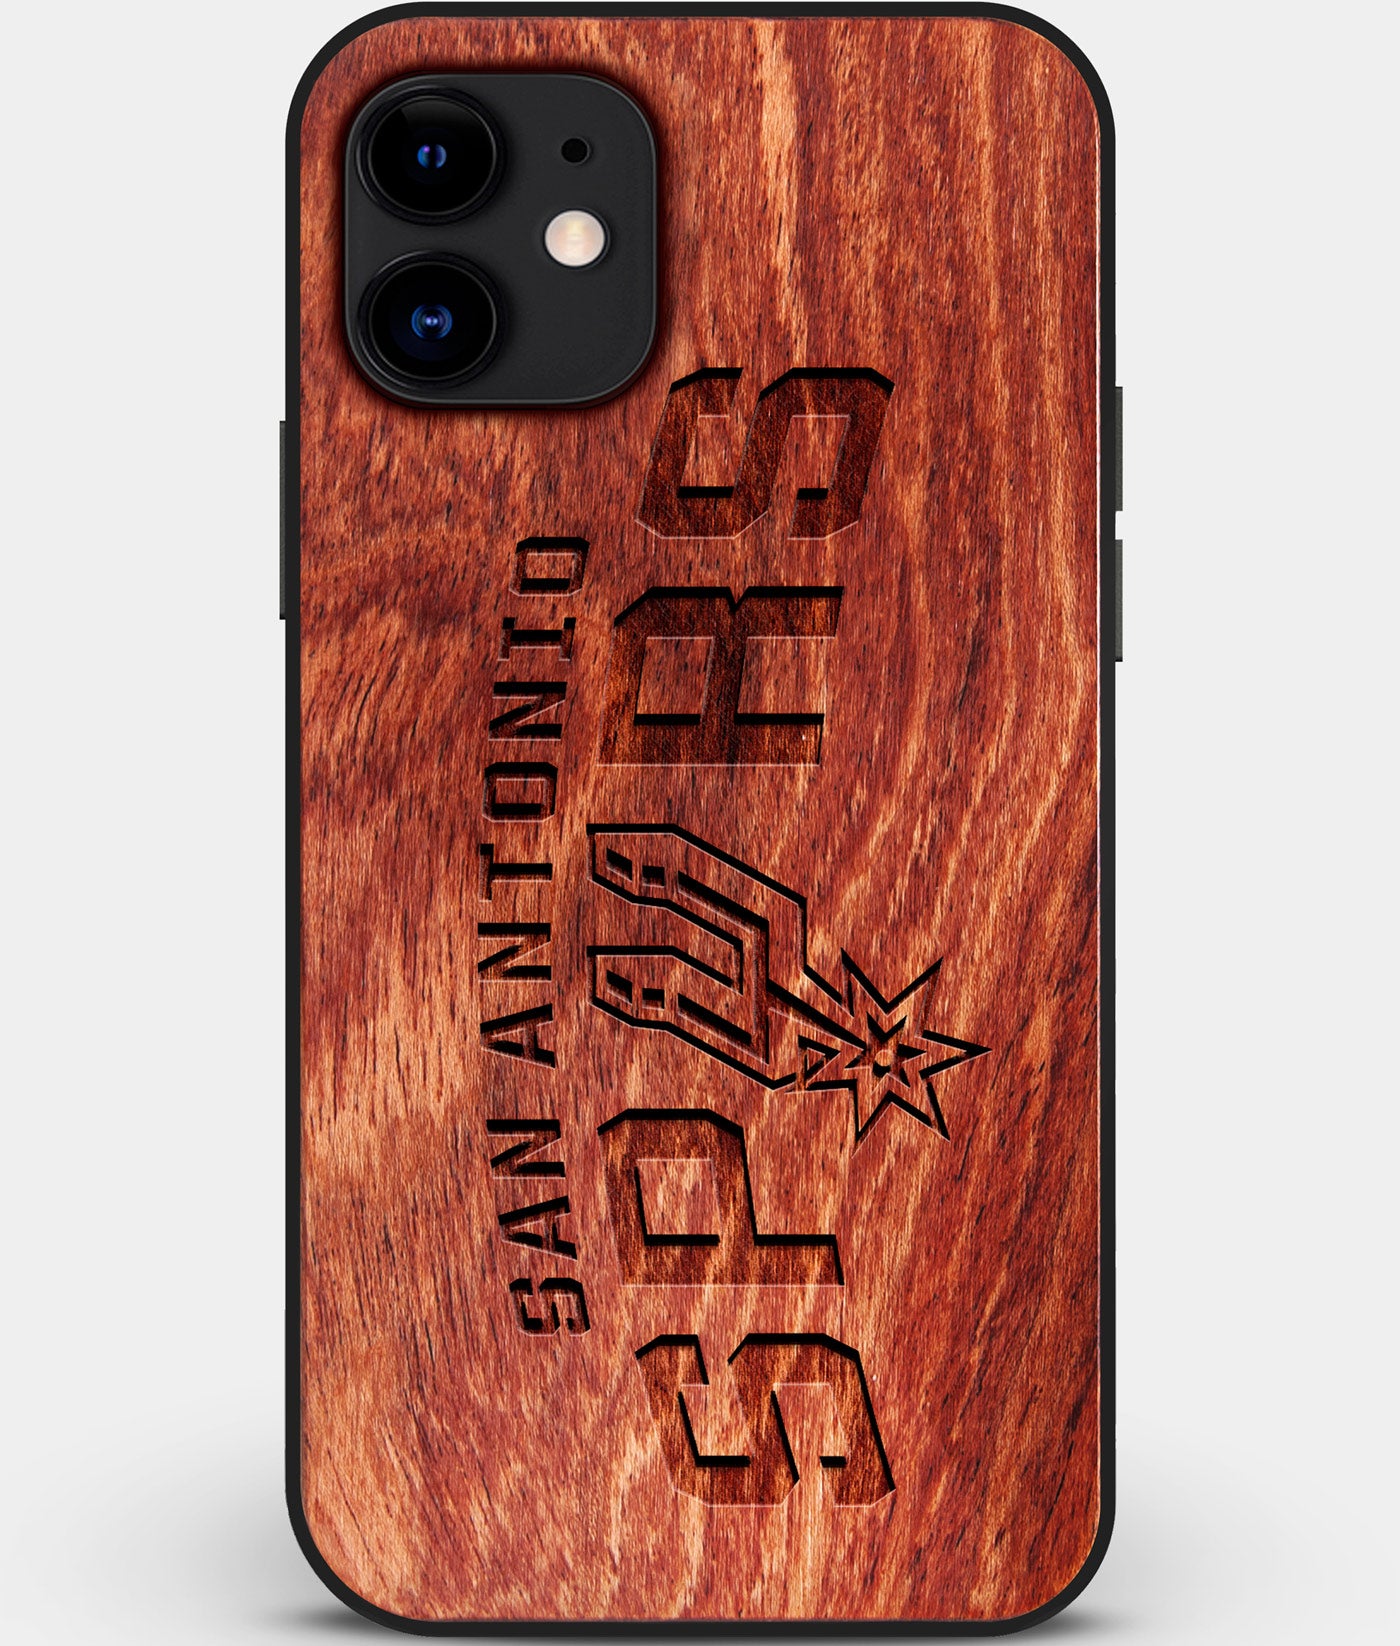 Custom Carved Wood San Antonio Spurs iPhone 12 Mini Case | Personalized Mahogany Wood San Antonio Spurs Cover, Birthday Gift, Gifts For Him, Monogrammed Gift For Fan | by Engraved In Nature